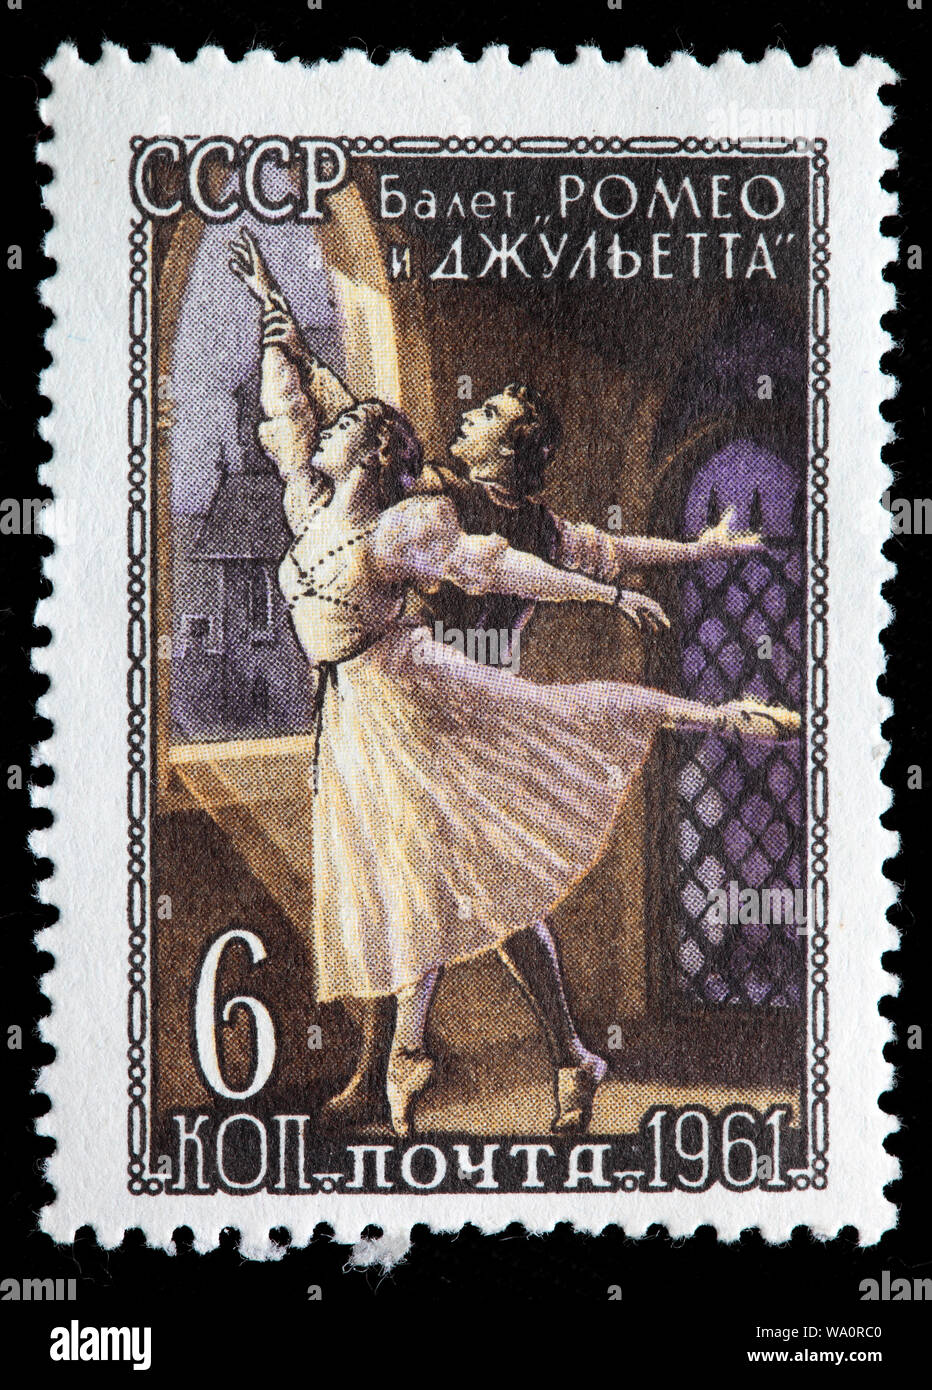 Scene from Romeo and Juliet ballet, Sergei Prokofiev, postage stamp, Russia, USSR, 1961 Stock Photo